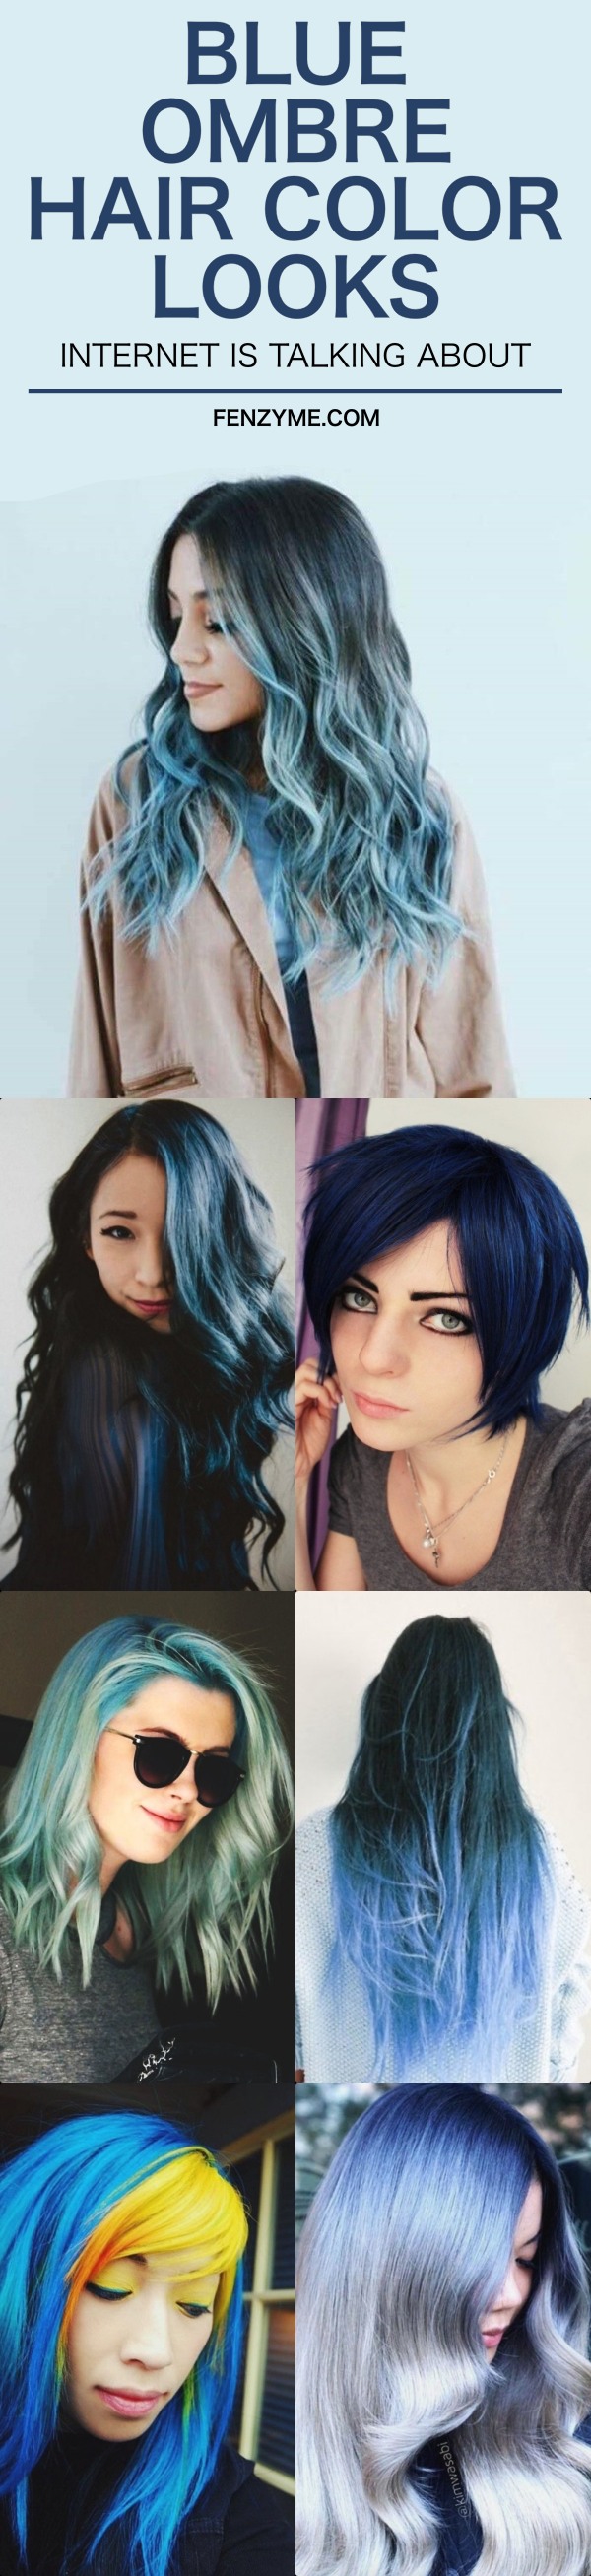 BLUE OMBRE HAIR COLOR LOOKS